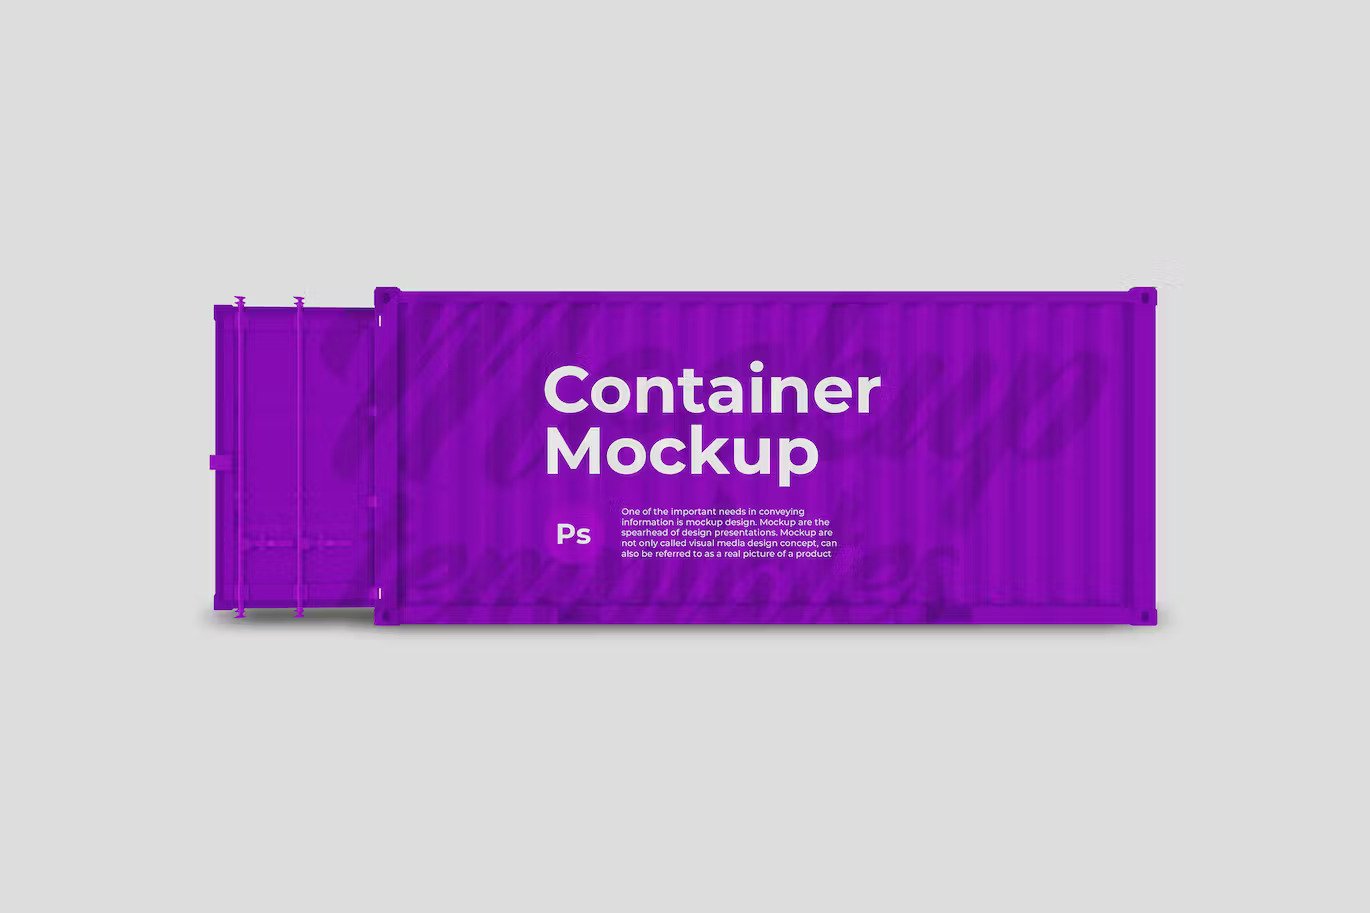 A container mockup templates